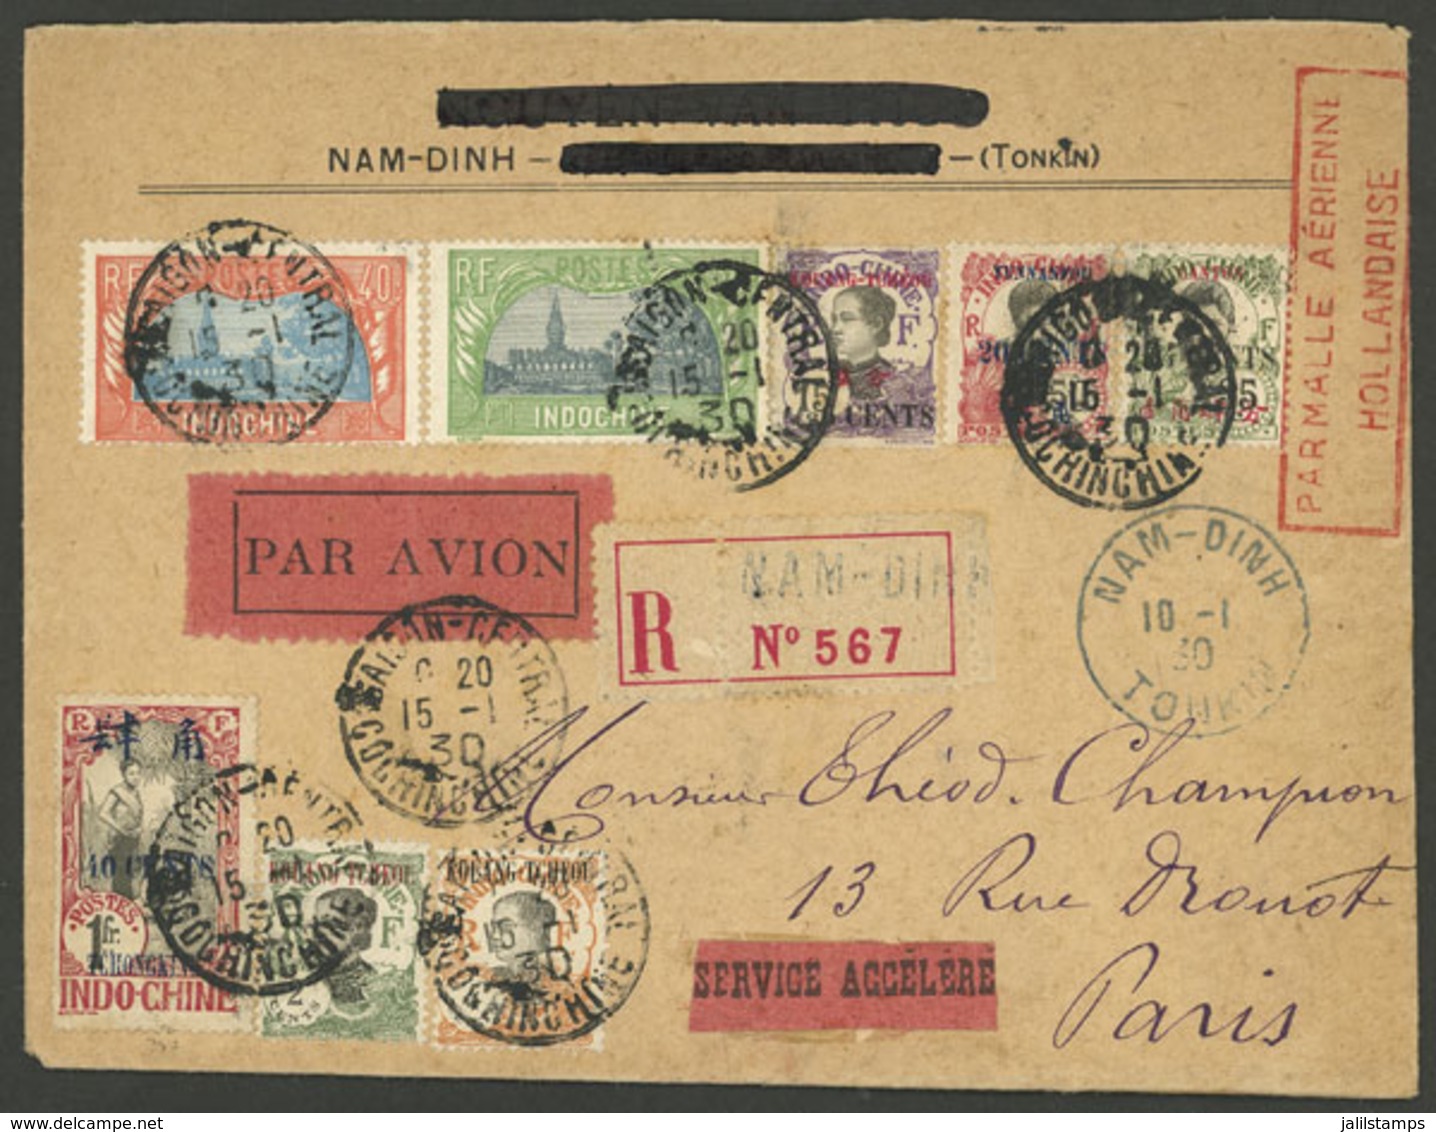 INDOCHINA: 15/JA/1930 Saigon - Paris, Second Flight By AA And KLM, Registered Cover With Very Nice Multicolor Postage, V - Autres - Asie